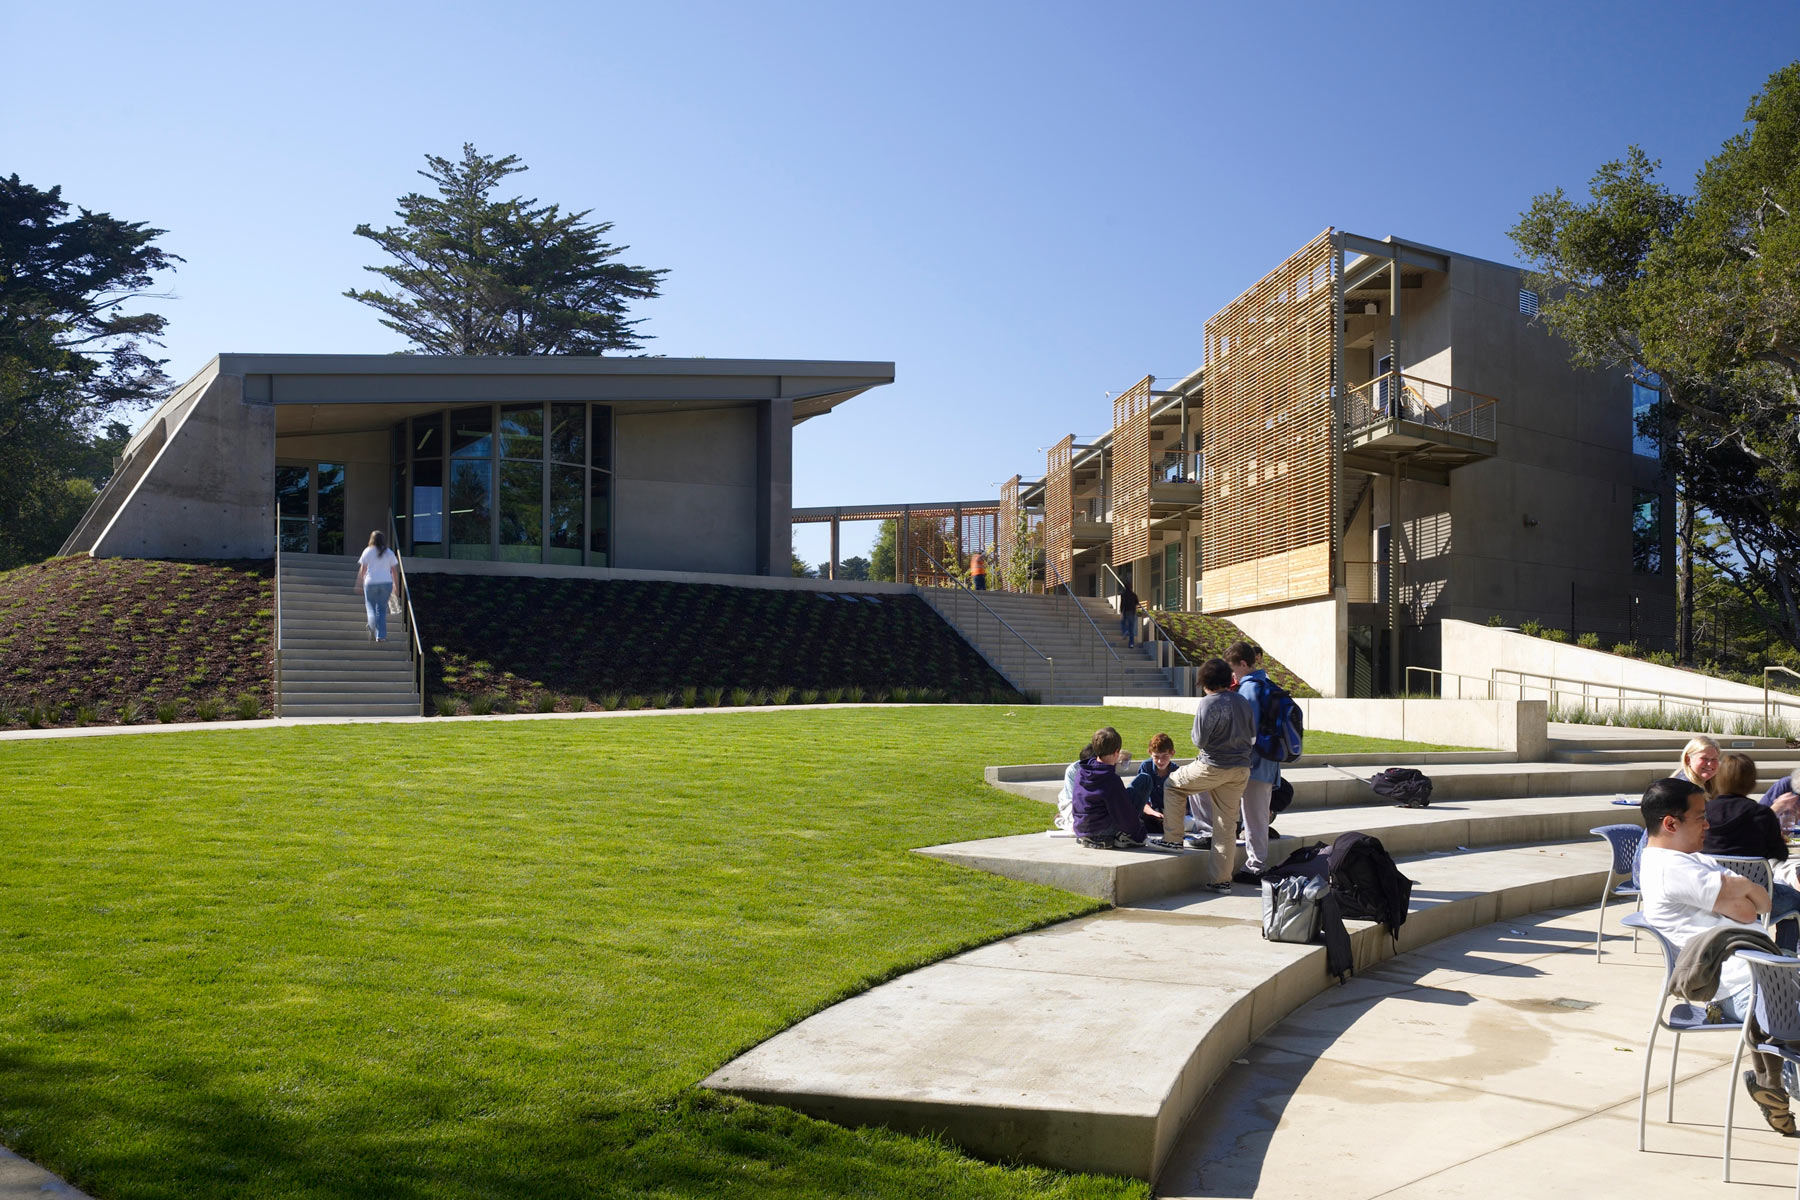 The Nueva Hillside Learning Complex is an innovative educational environment in the San Francisco Bay Area that is a sustainable model for 21st century students- the campus is certified LEED Gold and promotes environment stewardship and a passion for lifelong learning.